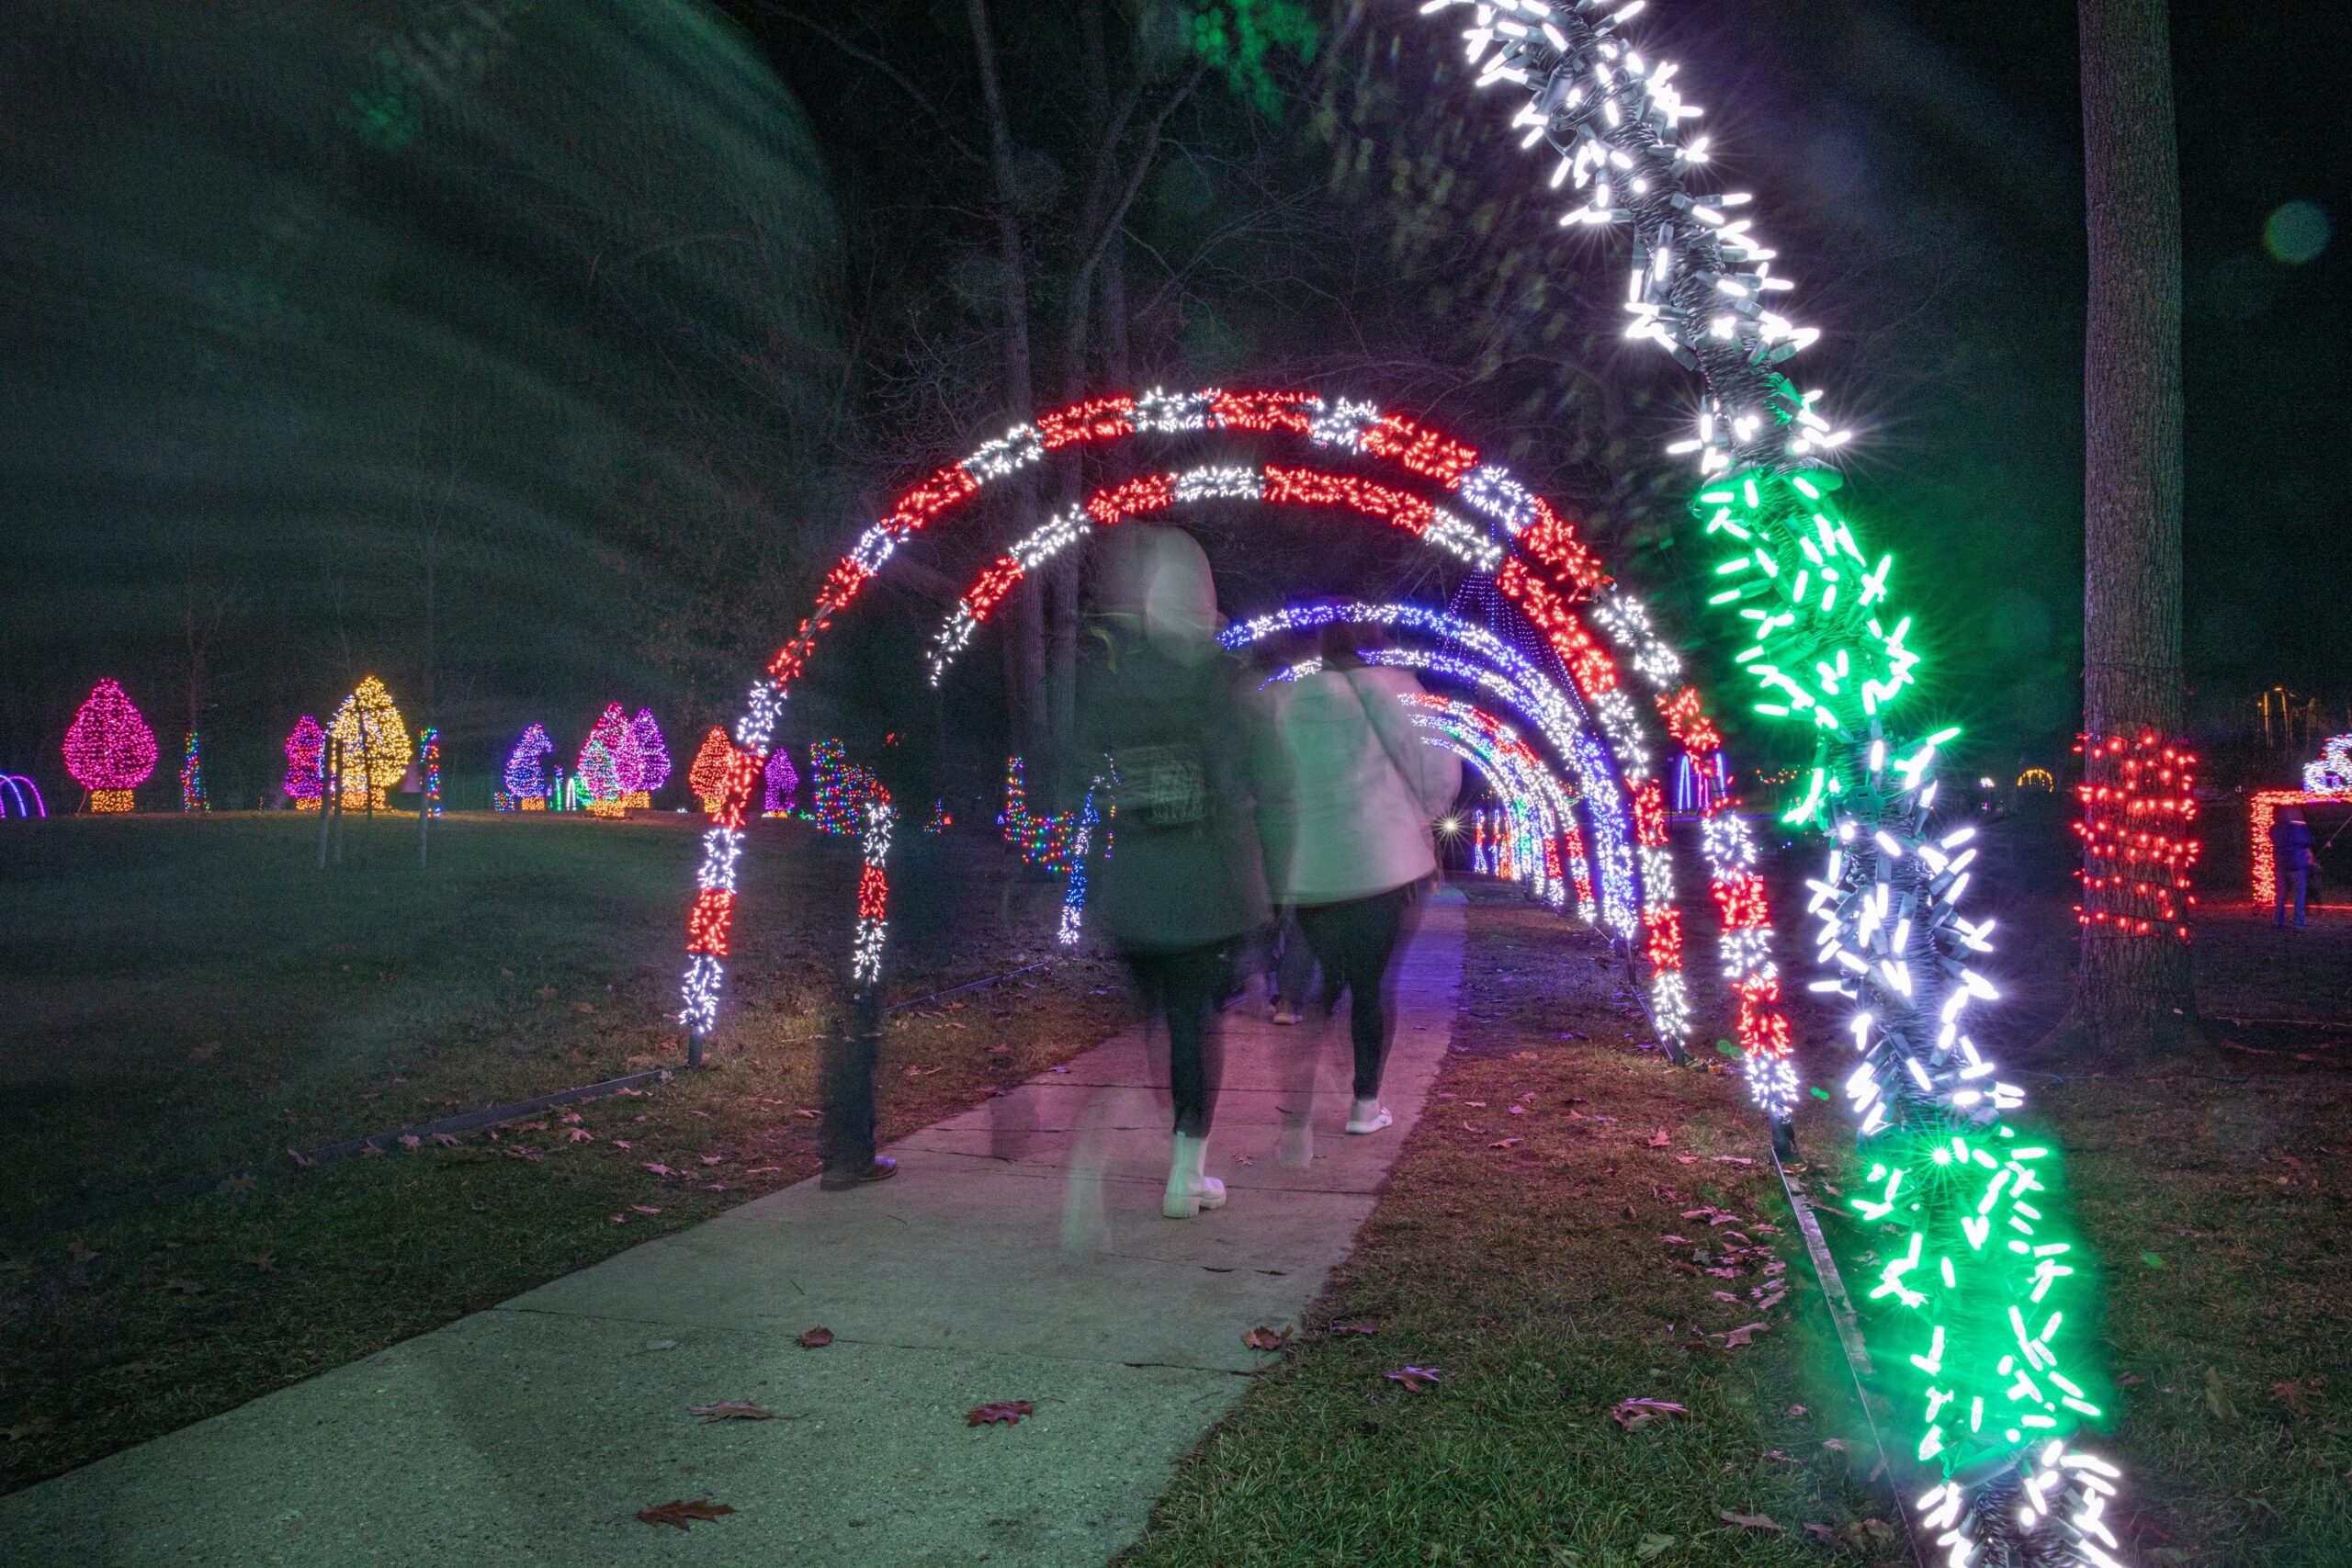 People walking through the light tunnel